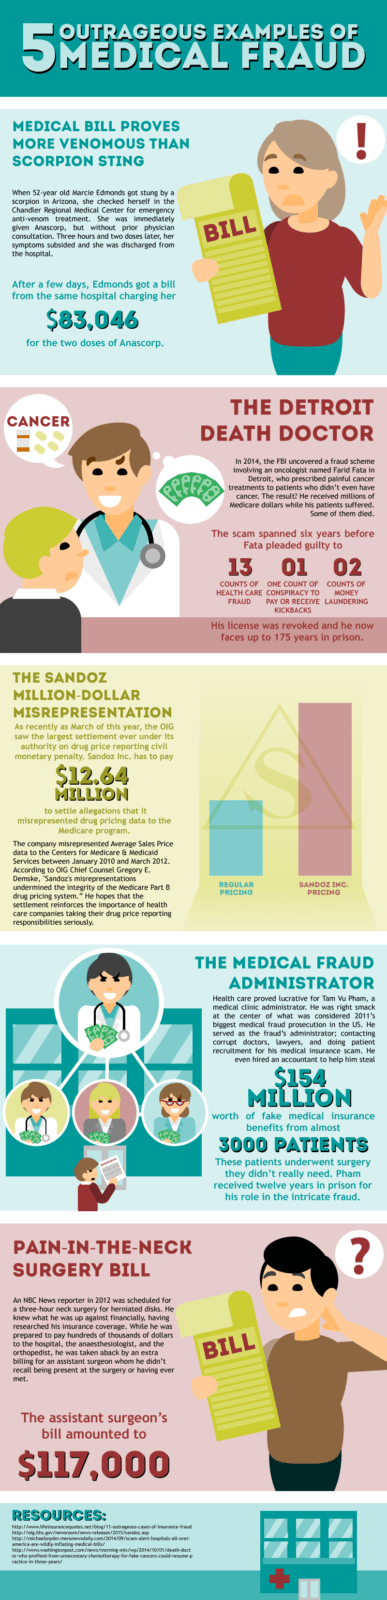 5 Most Outrageous Examples of Medical Fraud - Infographic